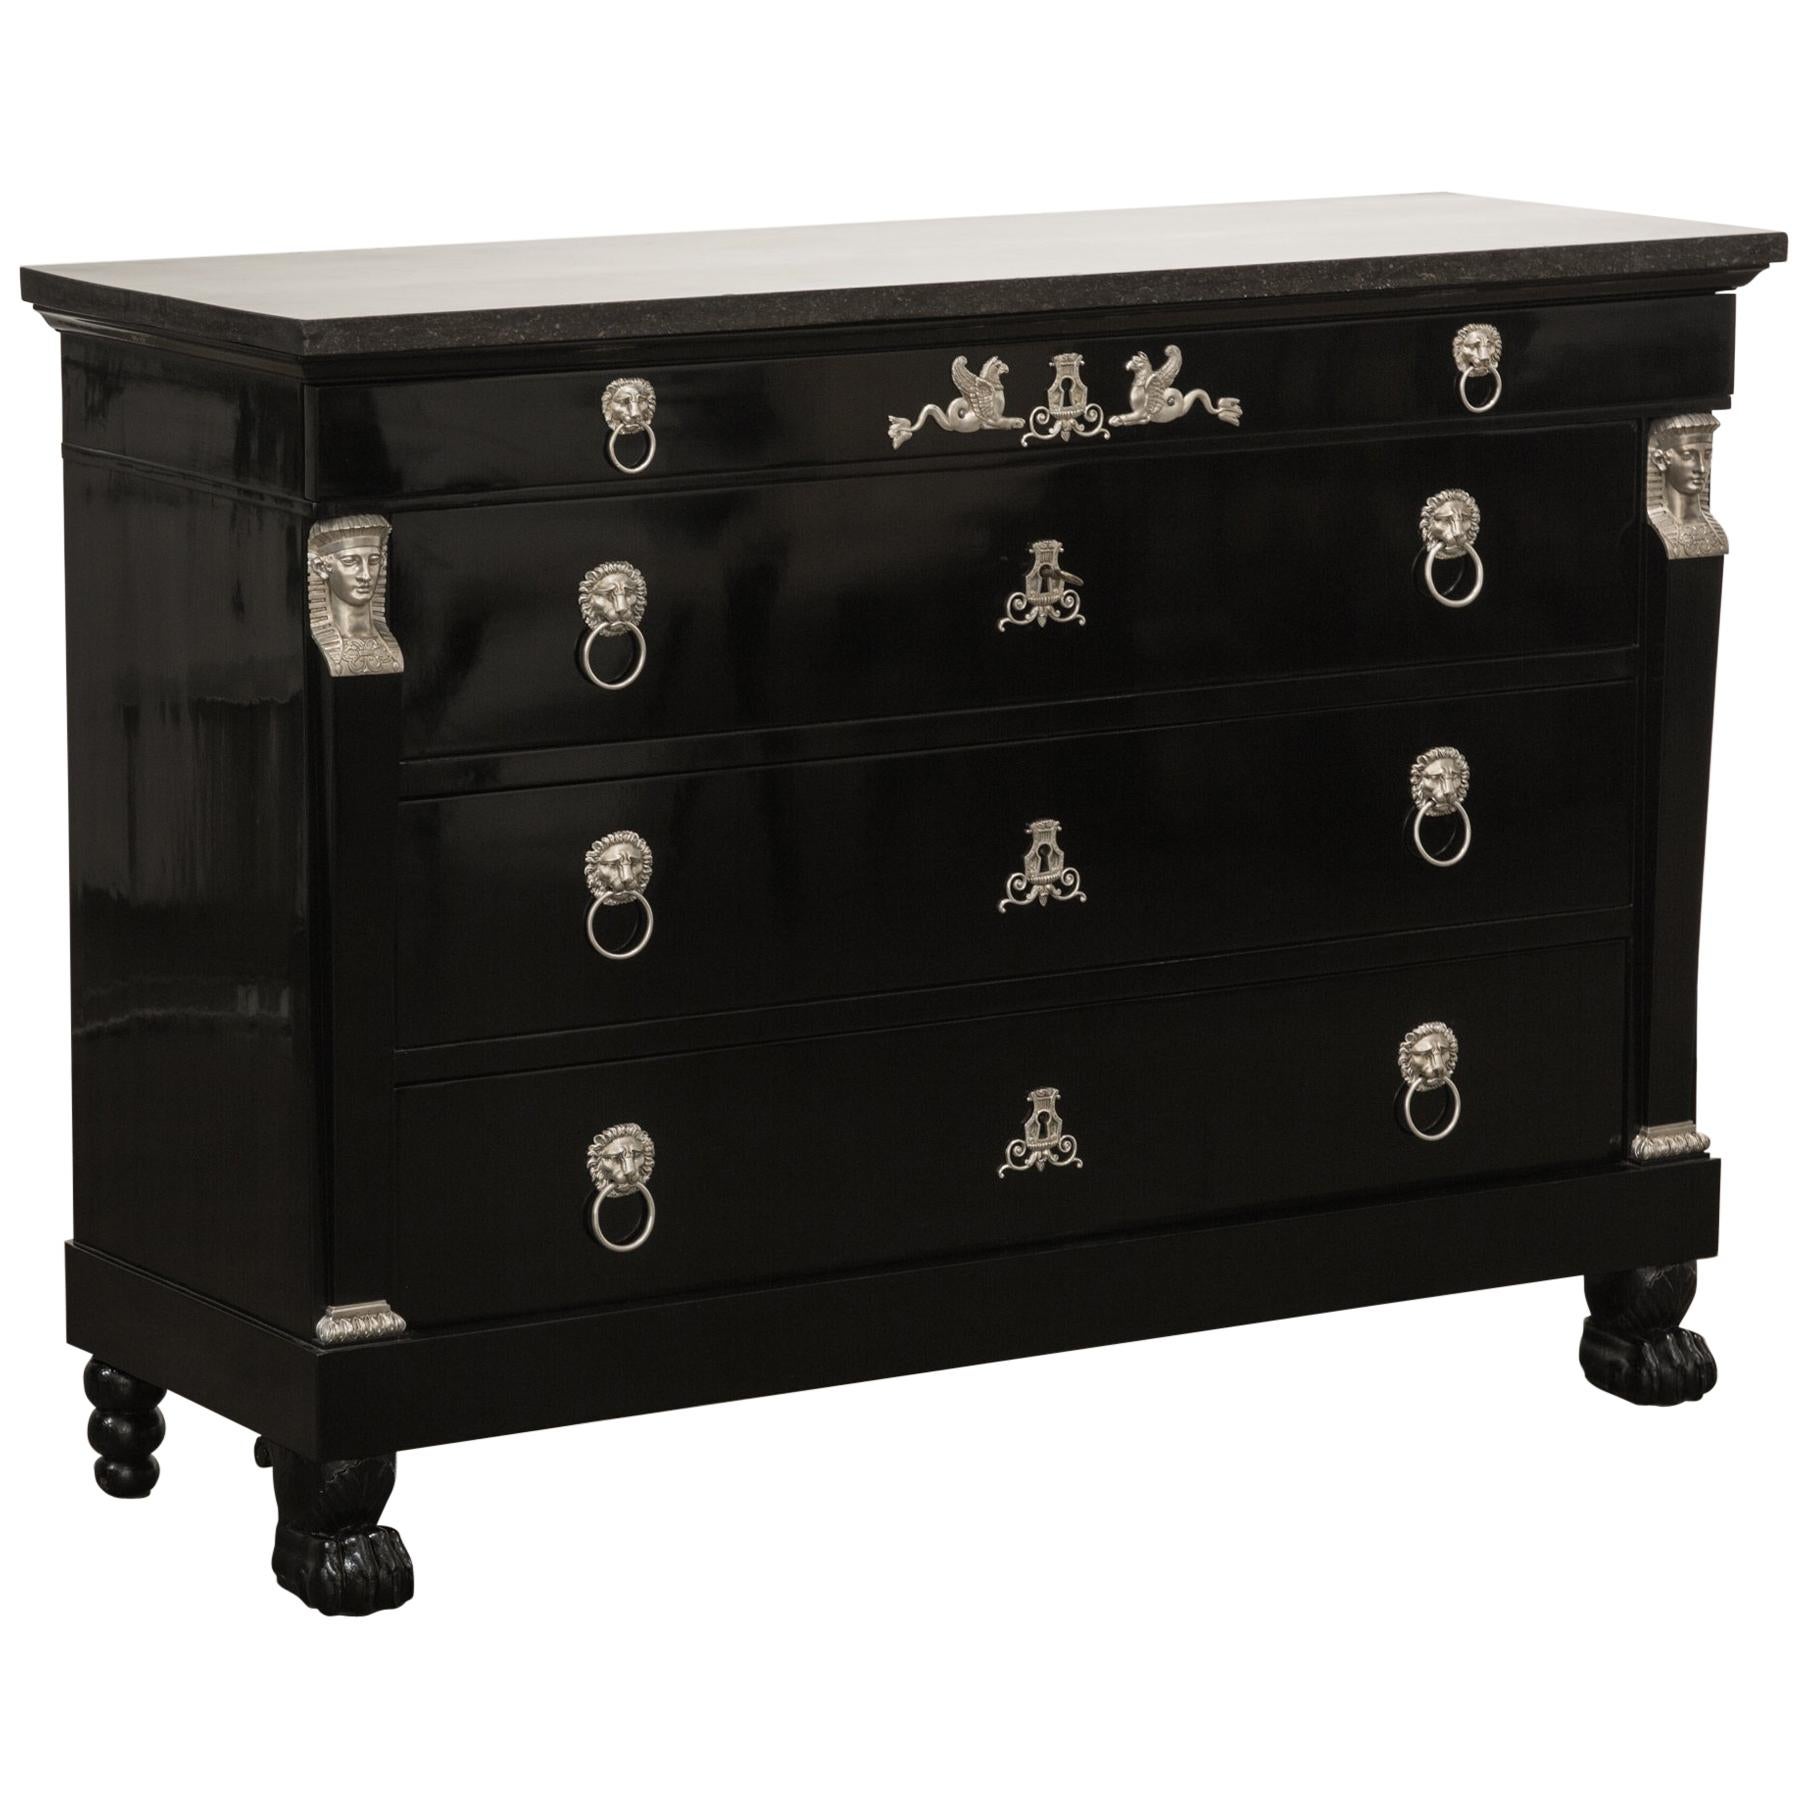 Antique Ebonized Empire Chest of Drawers from France, 19th Century